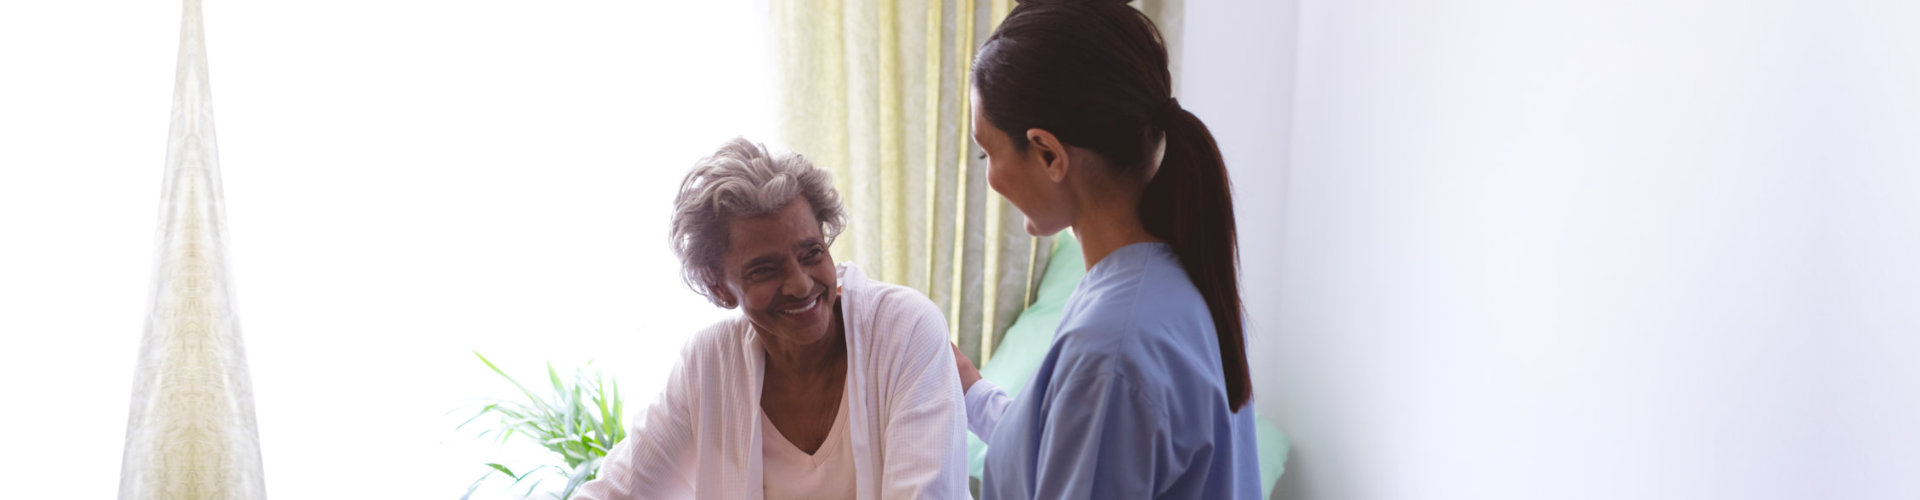 old woman smiling while facing the nurse